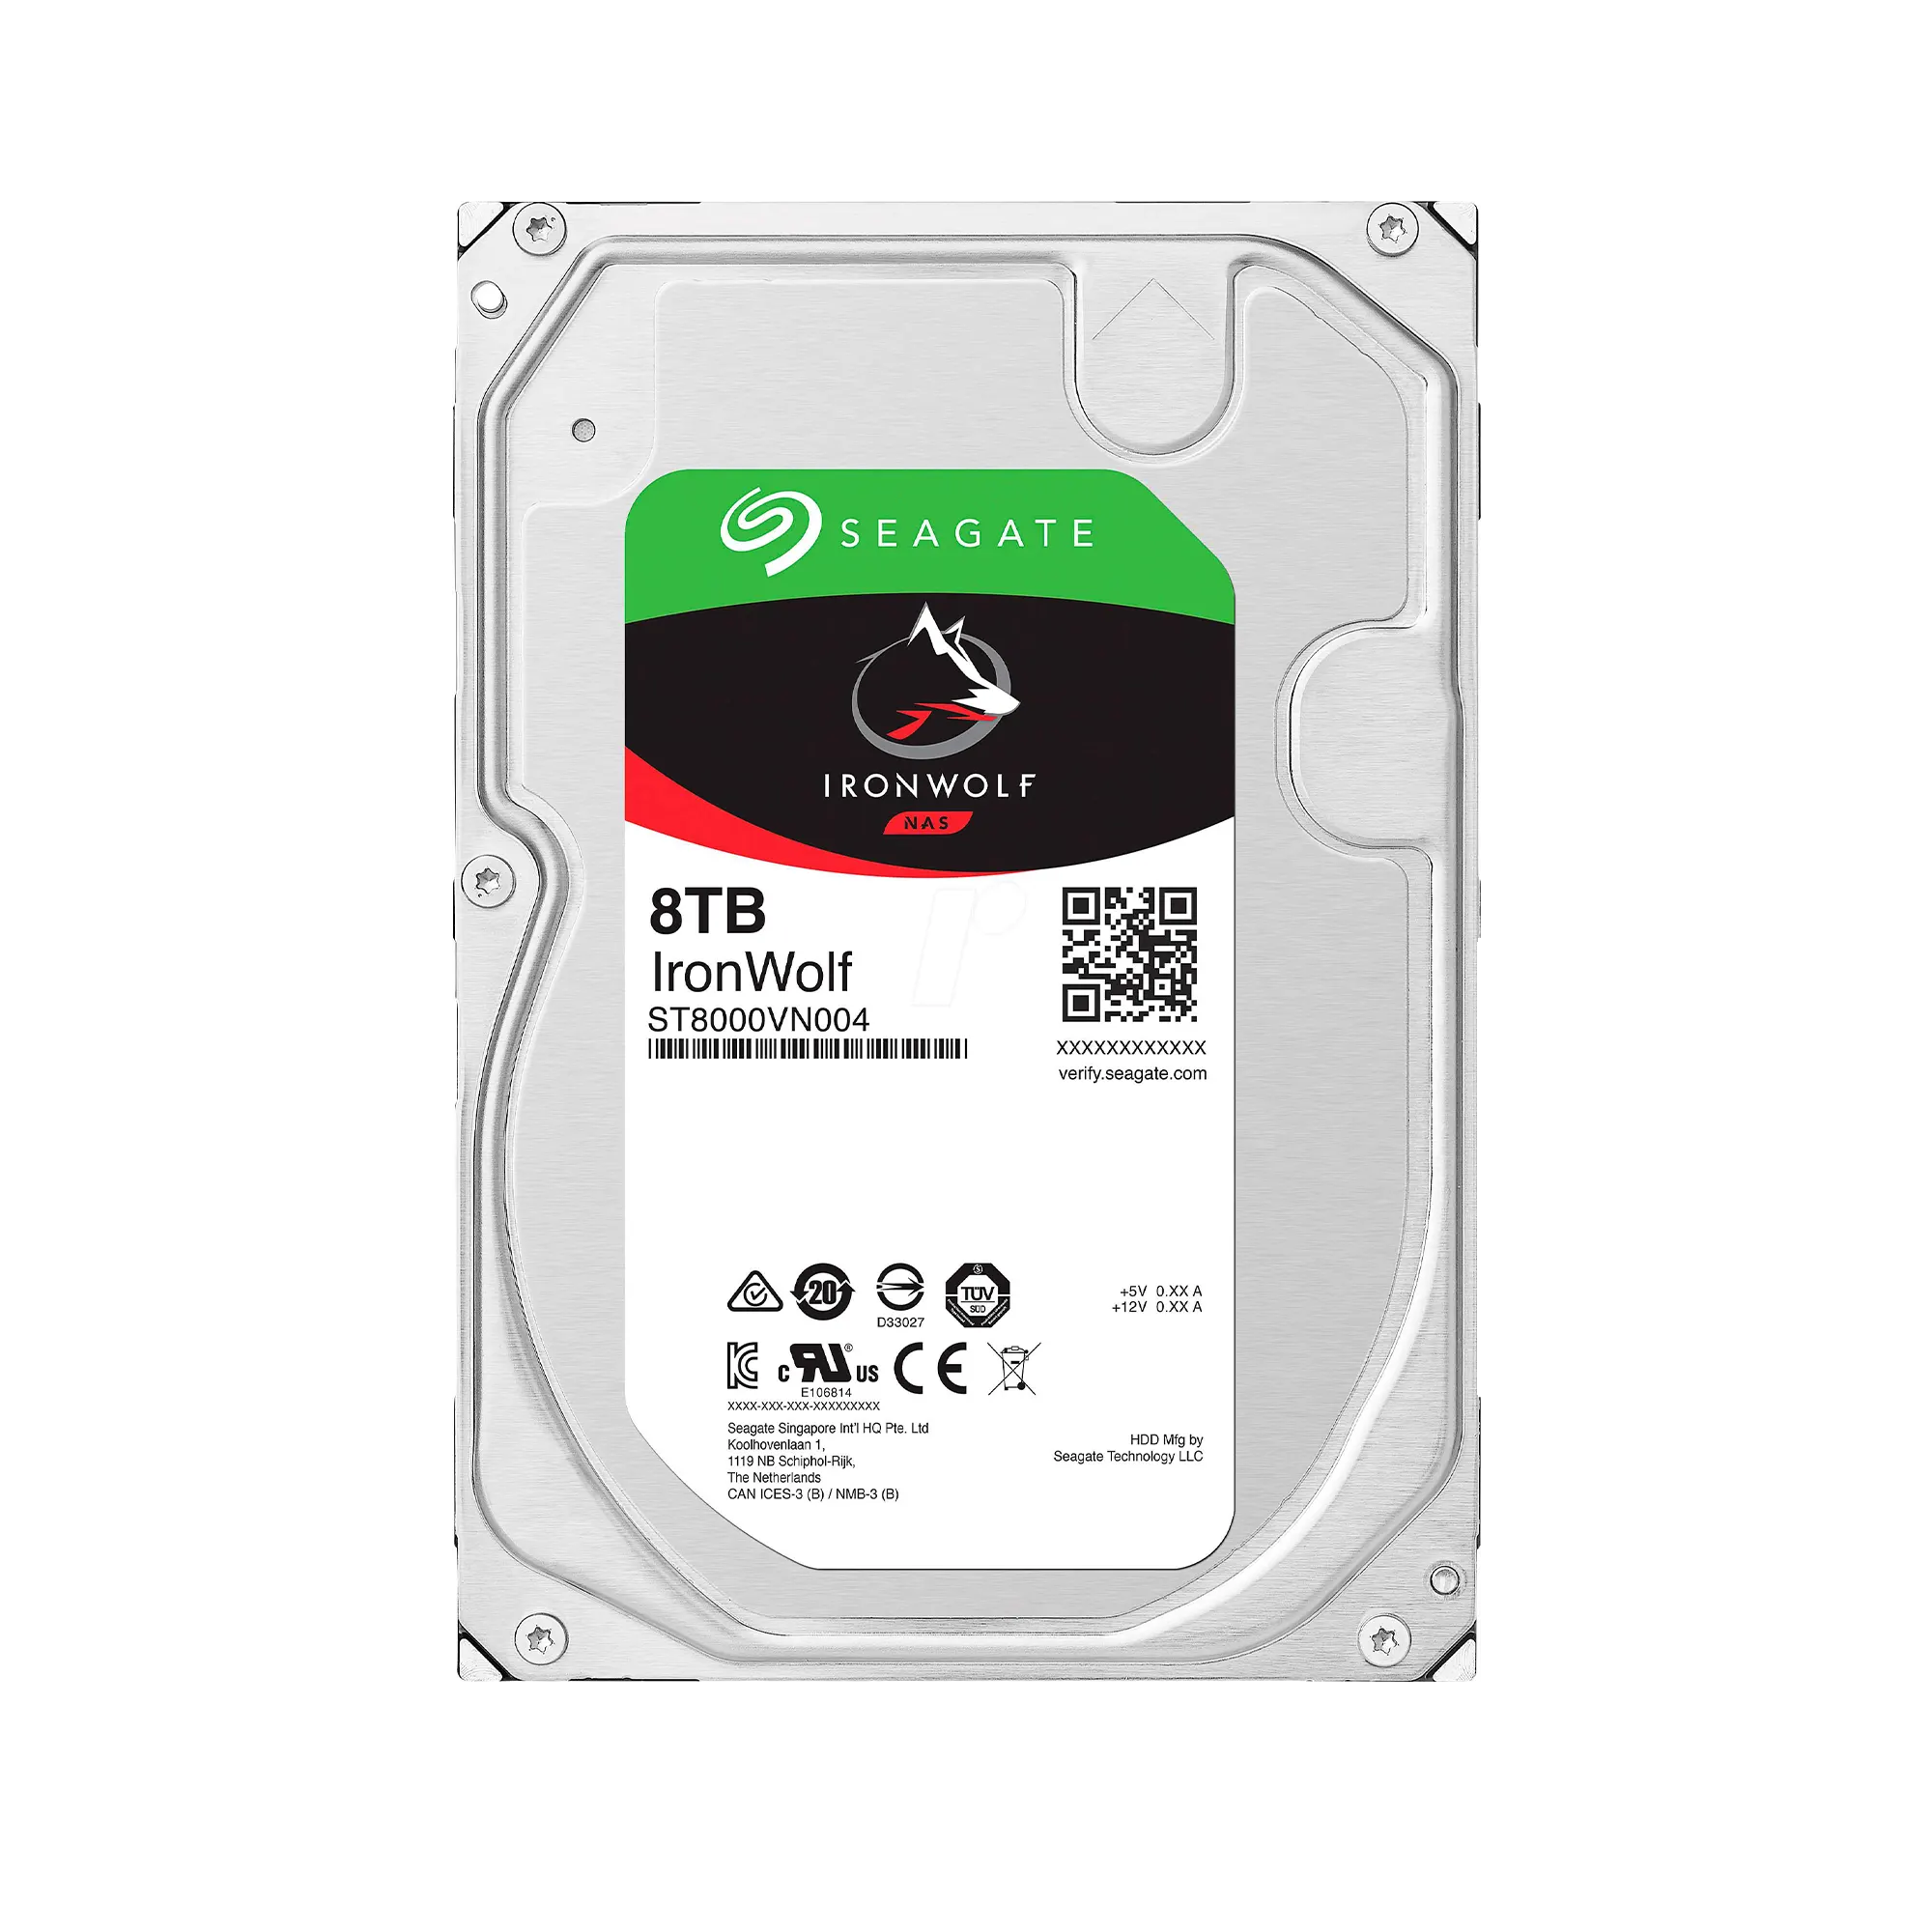 HDD Seagate IronWolf 8TB ST8000VN004 3.5 inch SATA III 256MB Cache 7200RPM